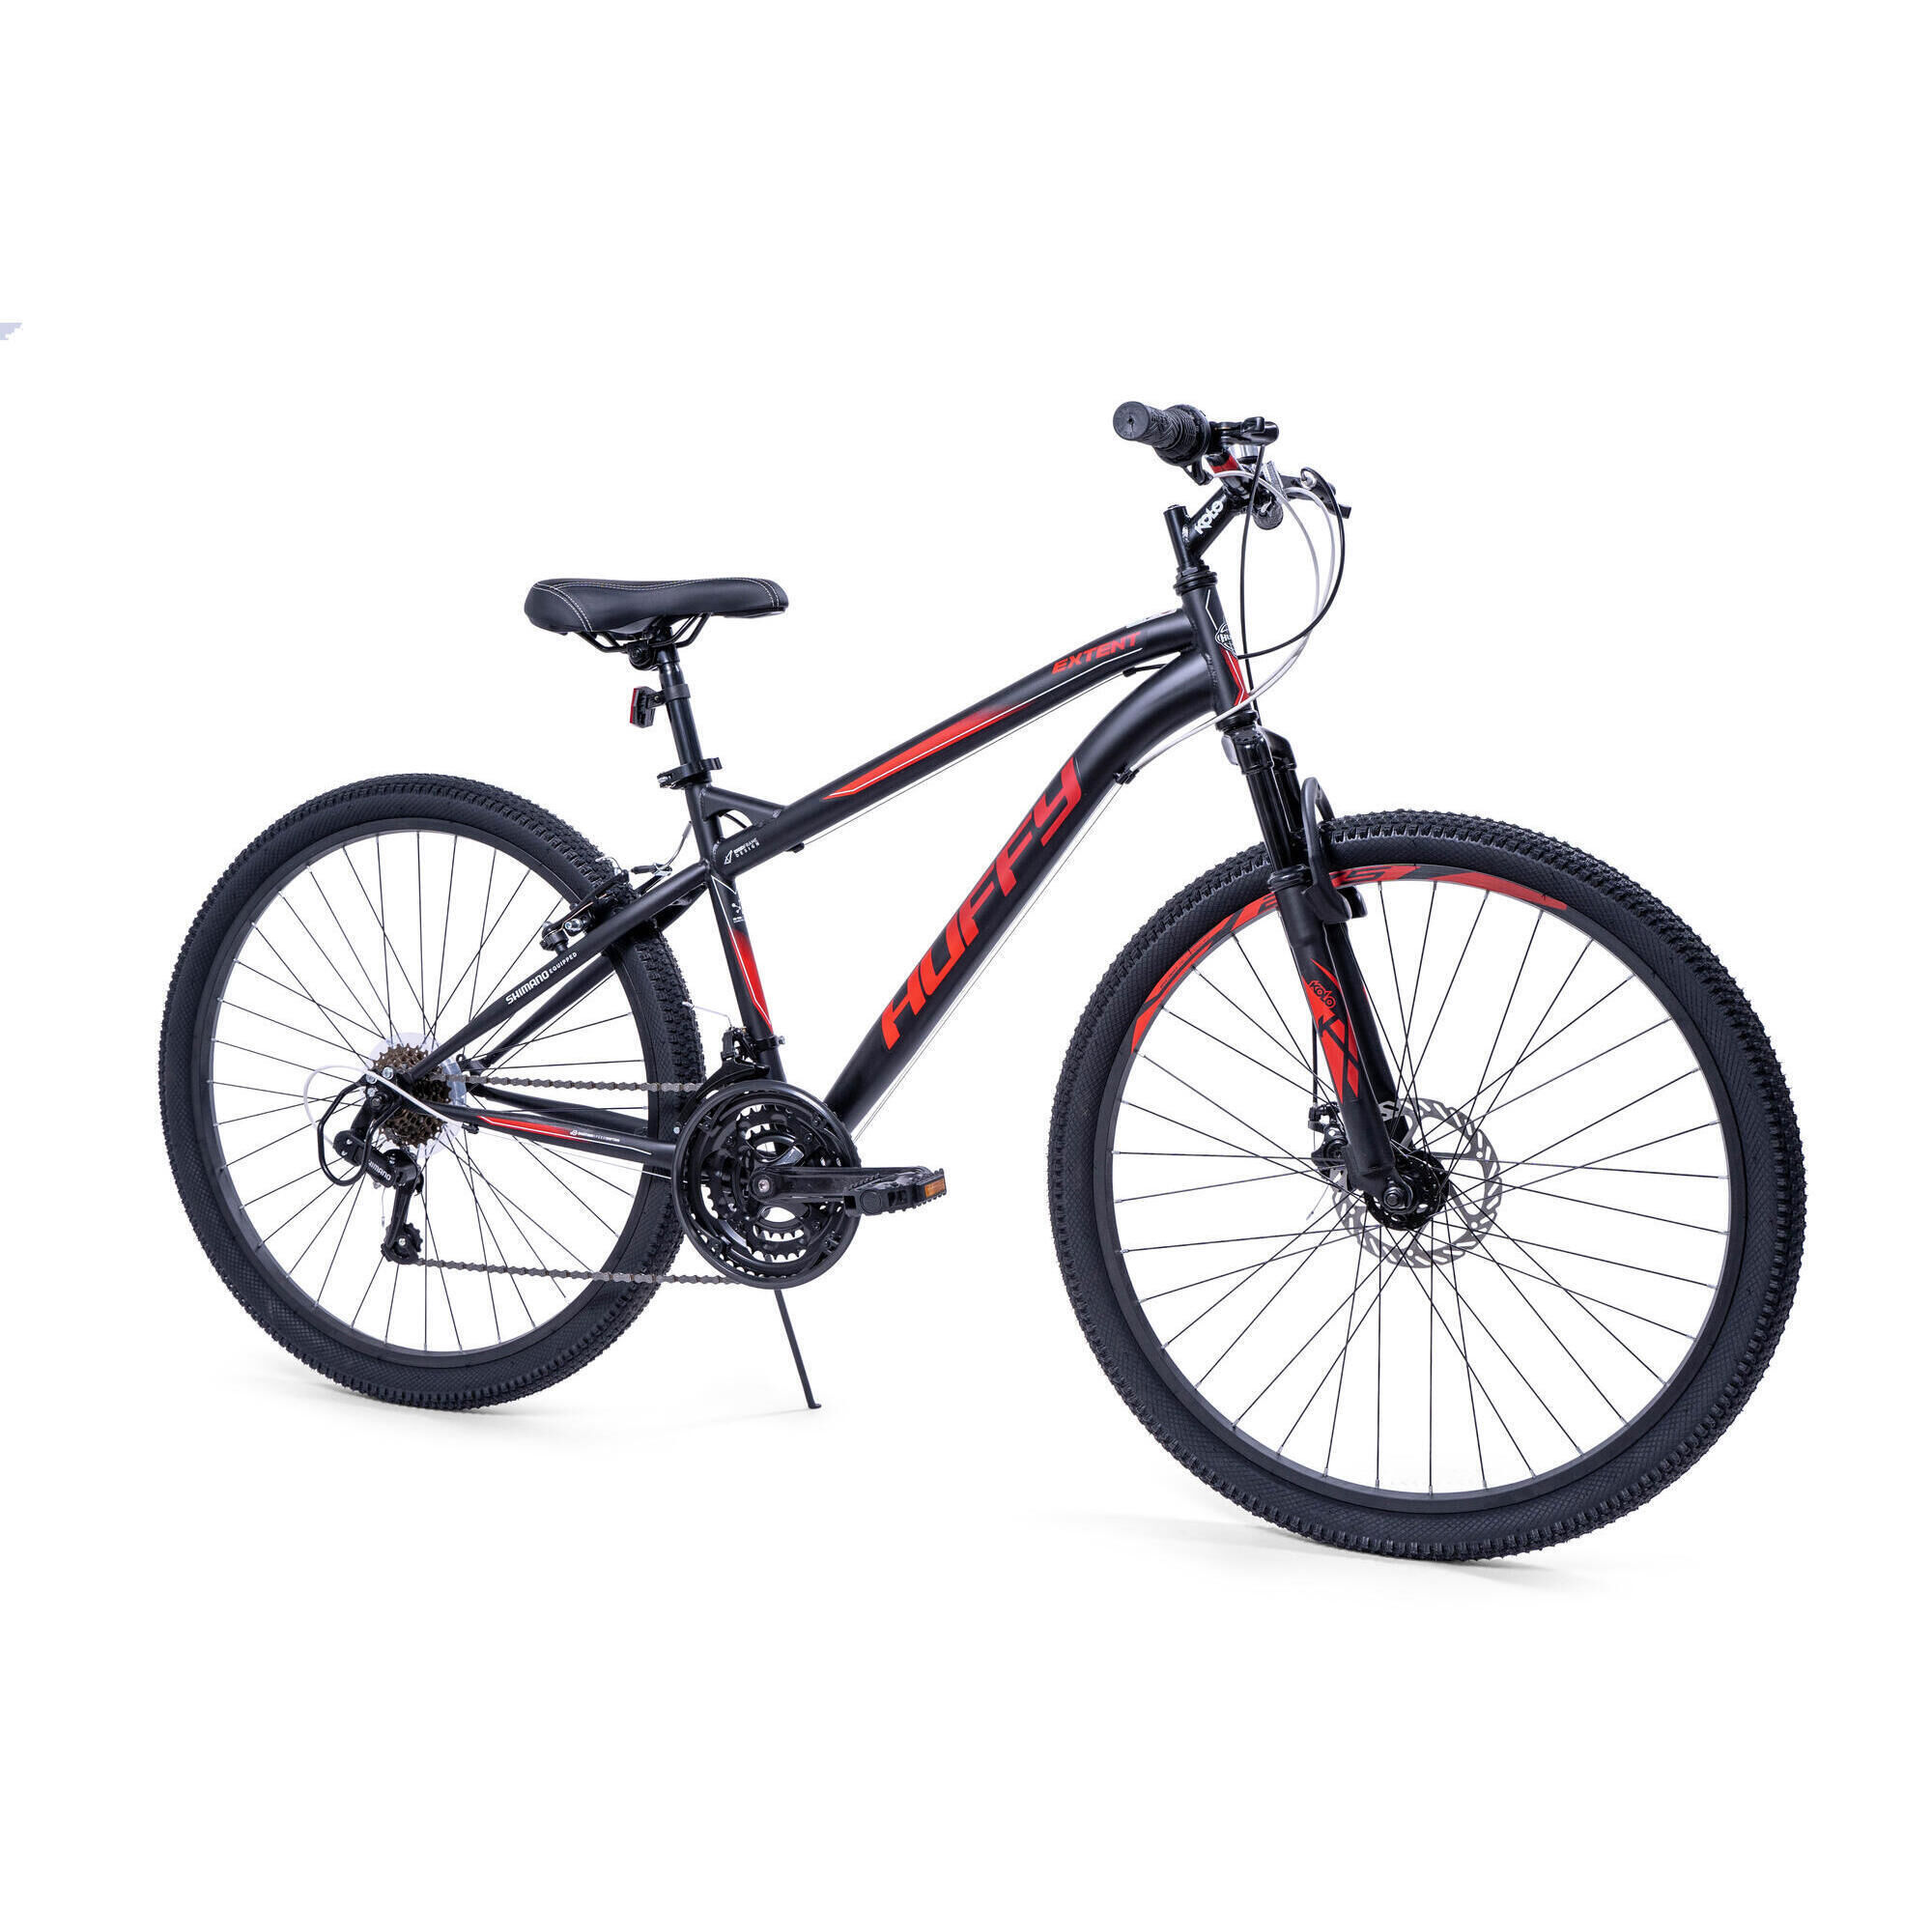 HUFFY Huffy Extent Mens Mountain Bike 27.5" Wheels 18 Speed Black + Red